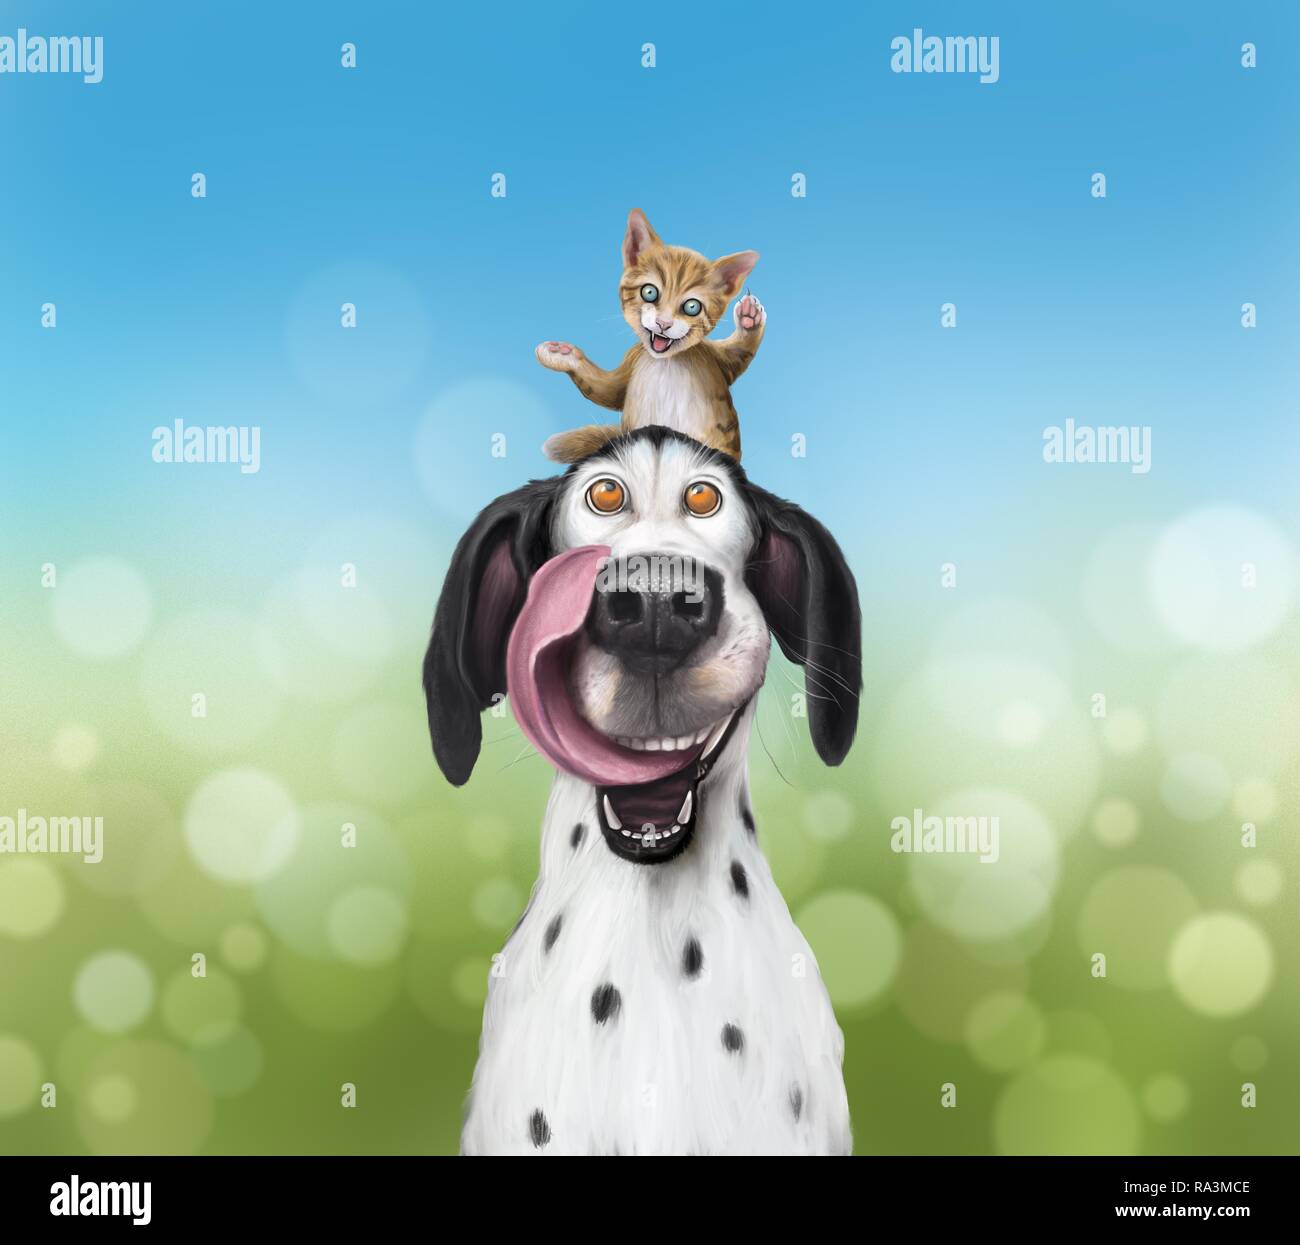 Black and white dog licking his mouth, kitten sitting on his head, greedy look, Germany Stock Photo